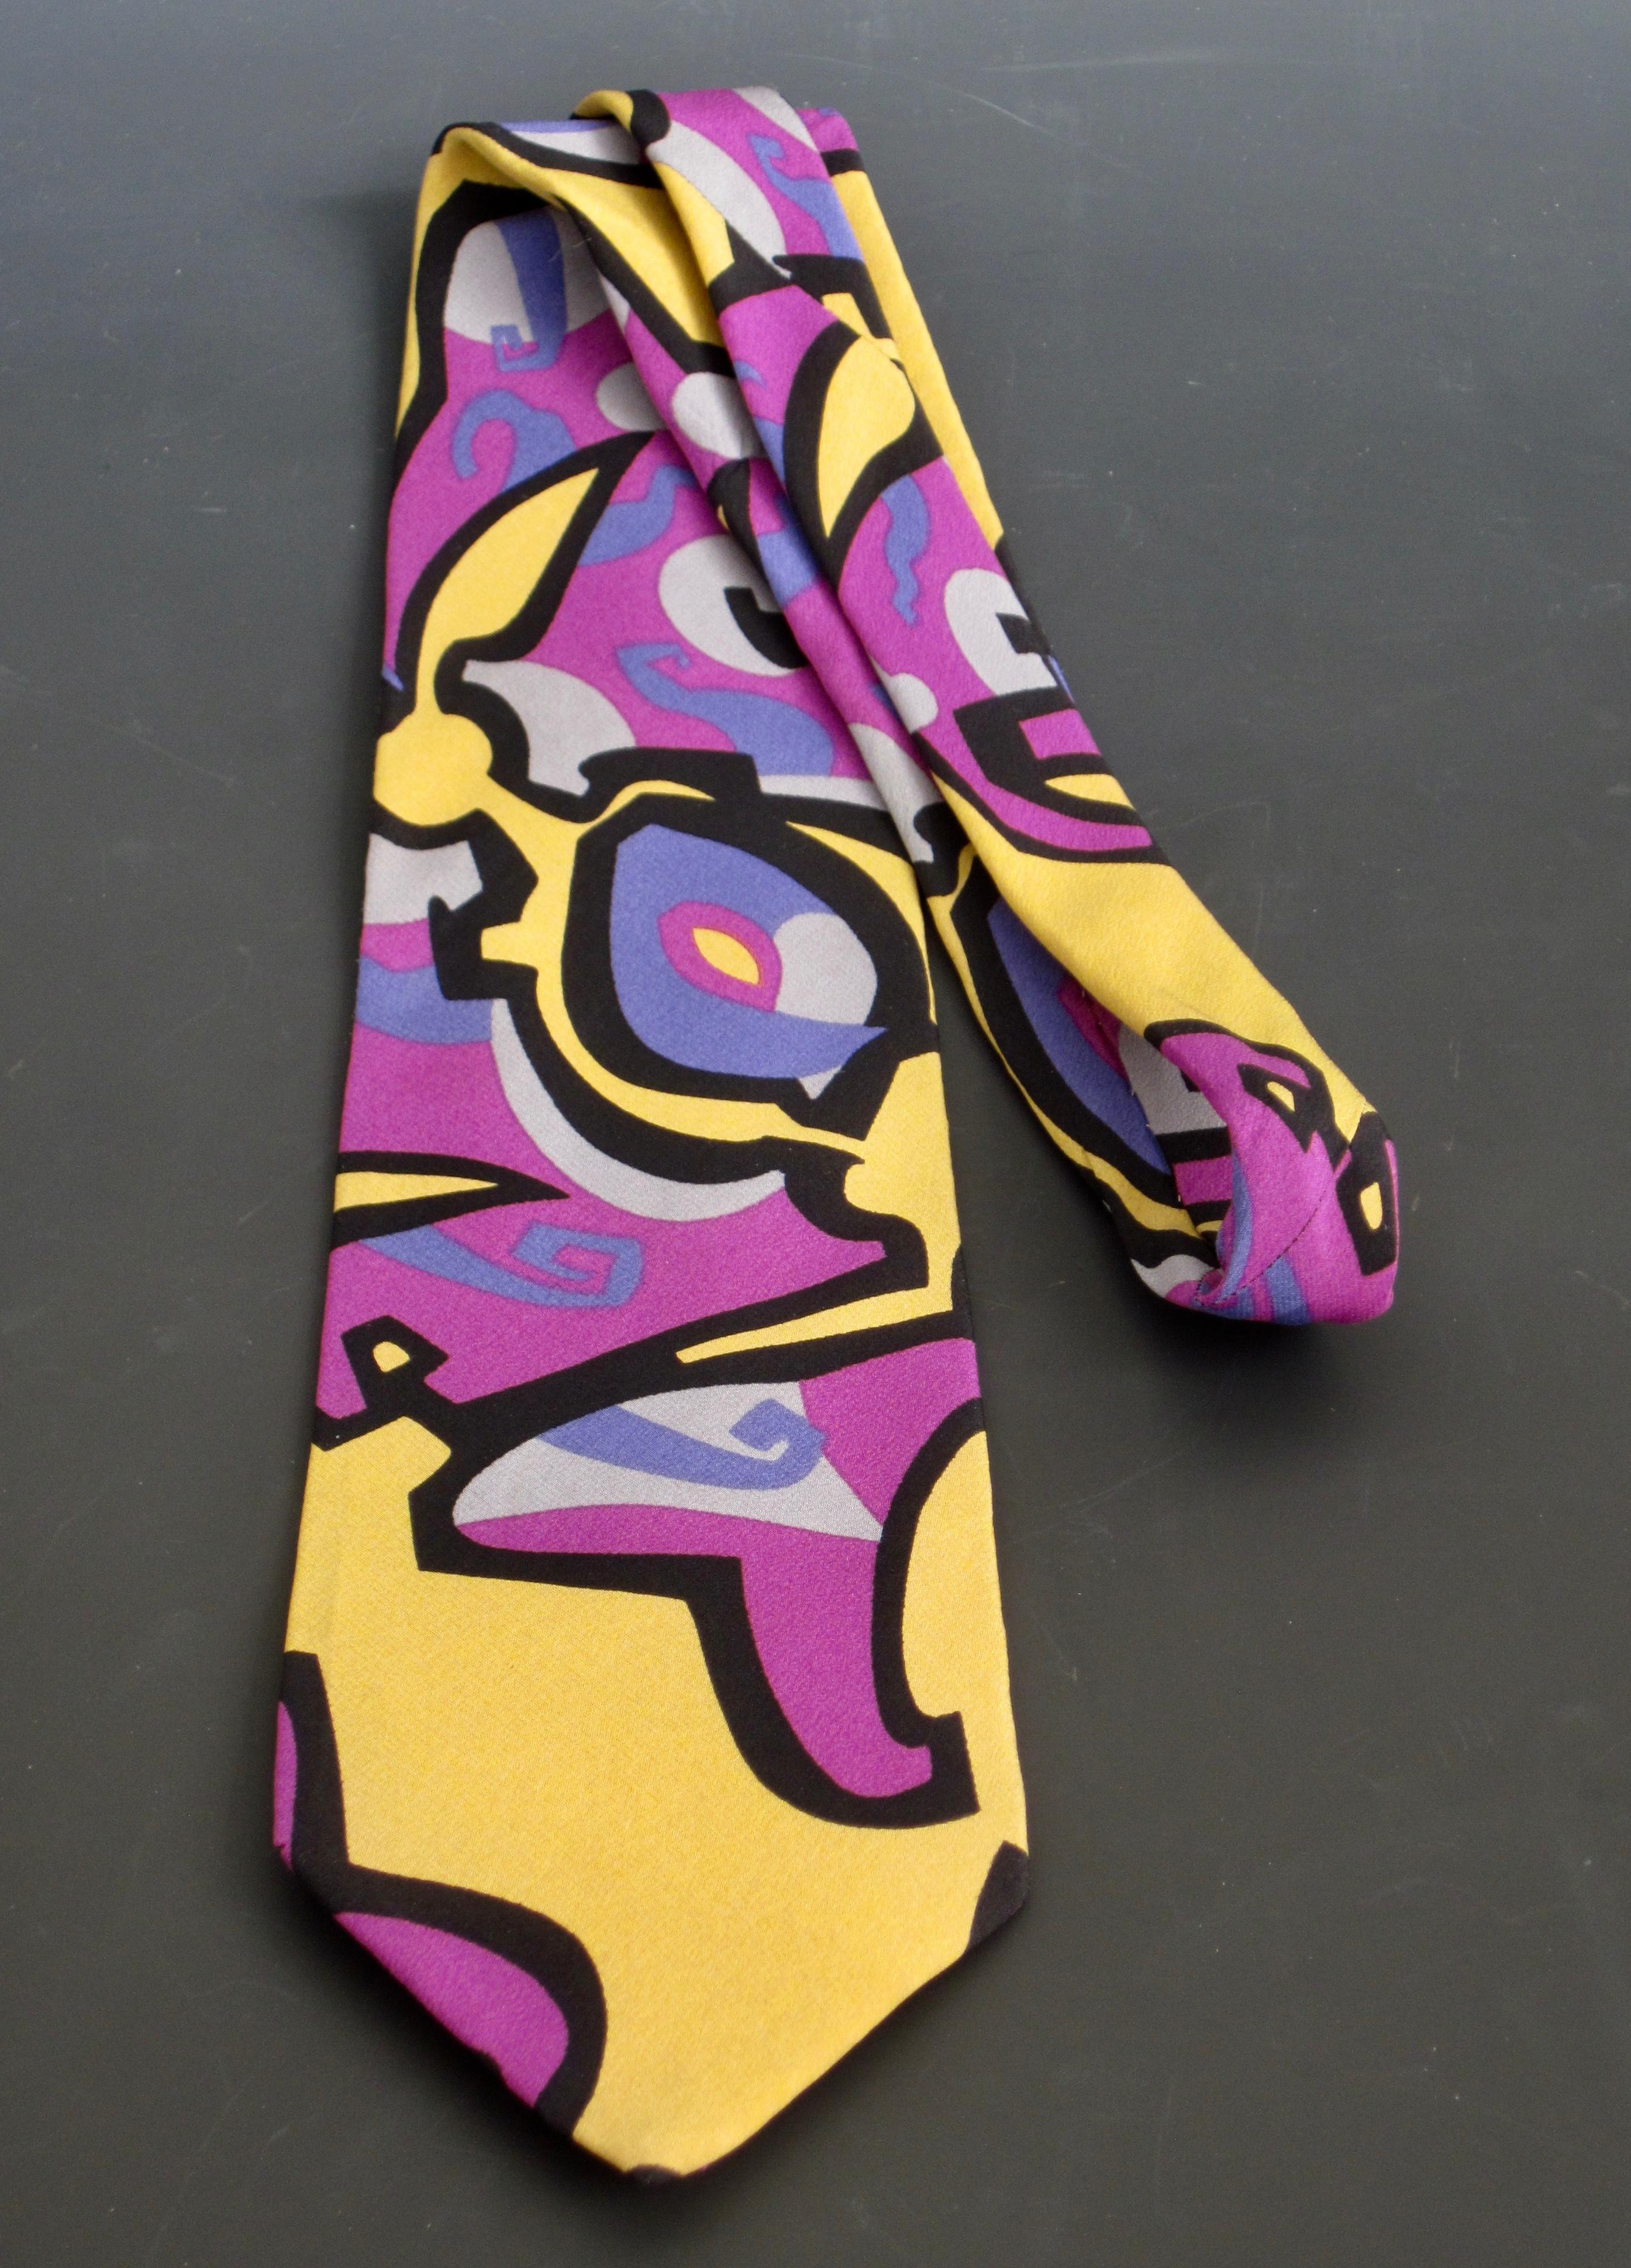 Stand out with this fabulous Memphis Milano tie! circa 1985, this 100% silk necktie features a brightly colored abstract design that was created by Memphis Milano guest designer, G. Della Vittoria. Comprised of black outlined magenta, periwinkle,